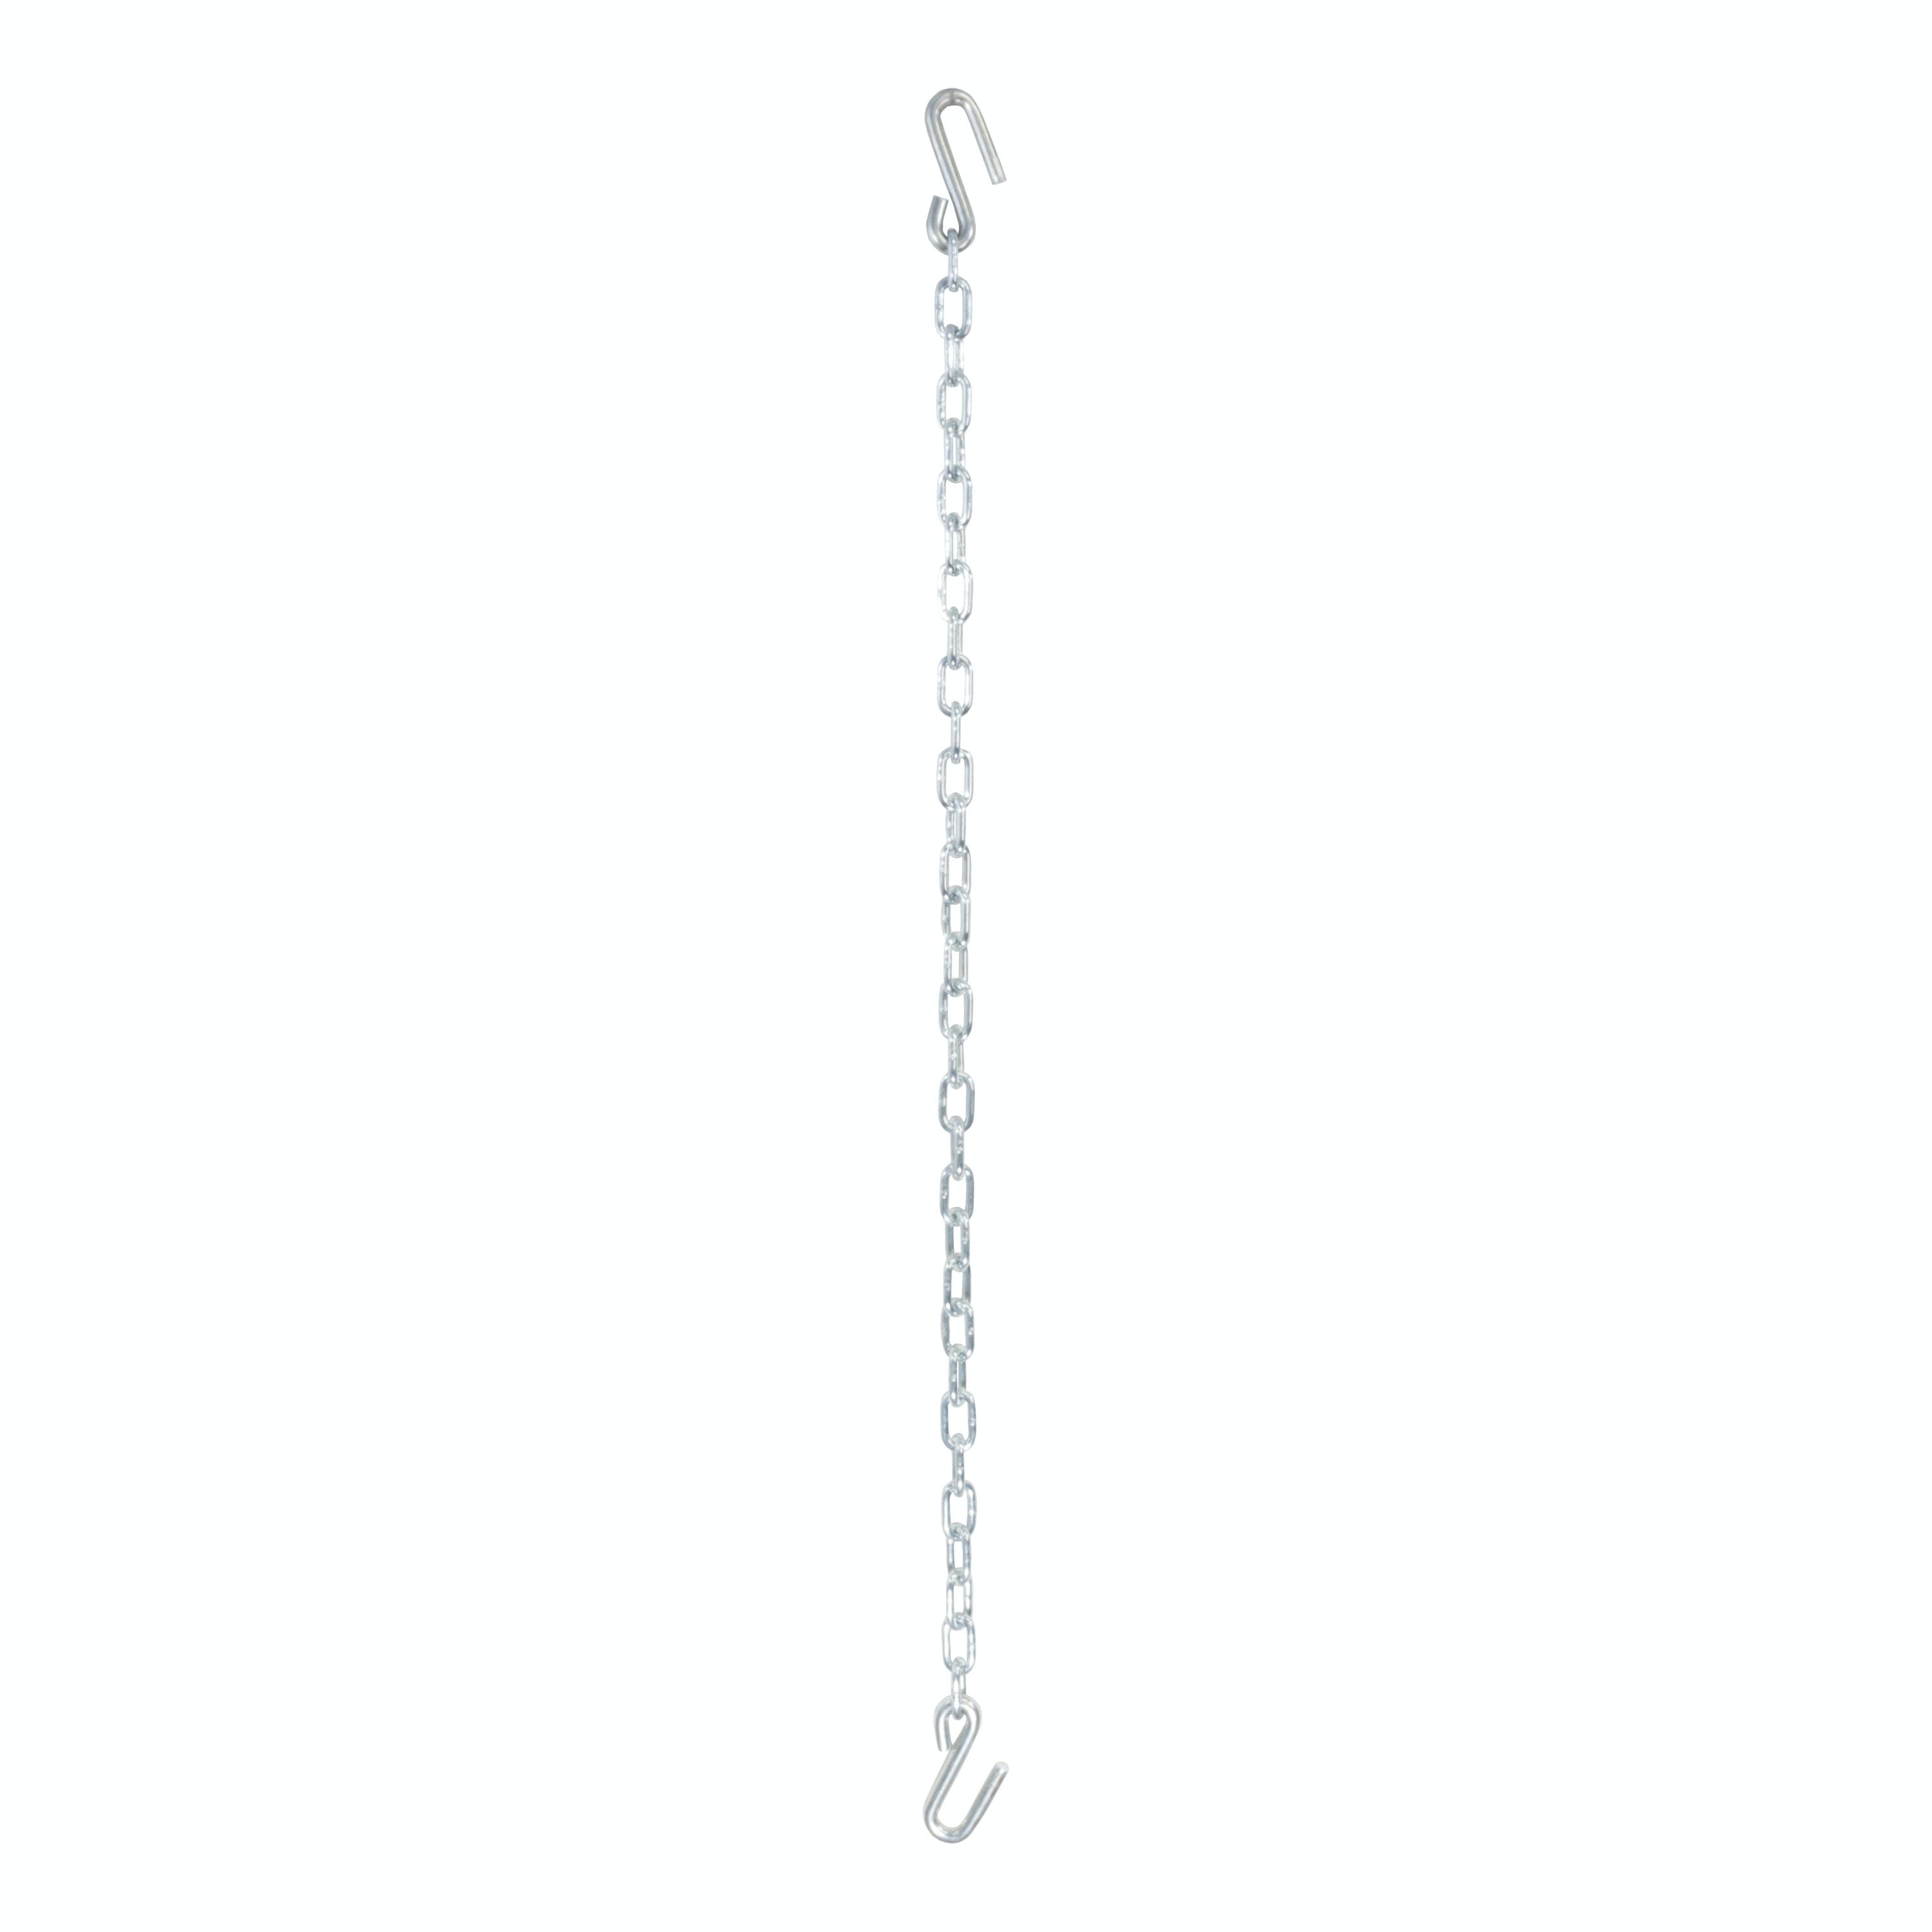 CURT 80031 48 Safety Chain with 2 S-Hooks (5,000 lbs, Clear Zinc, Packaged)